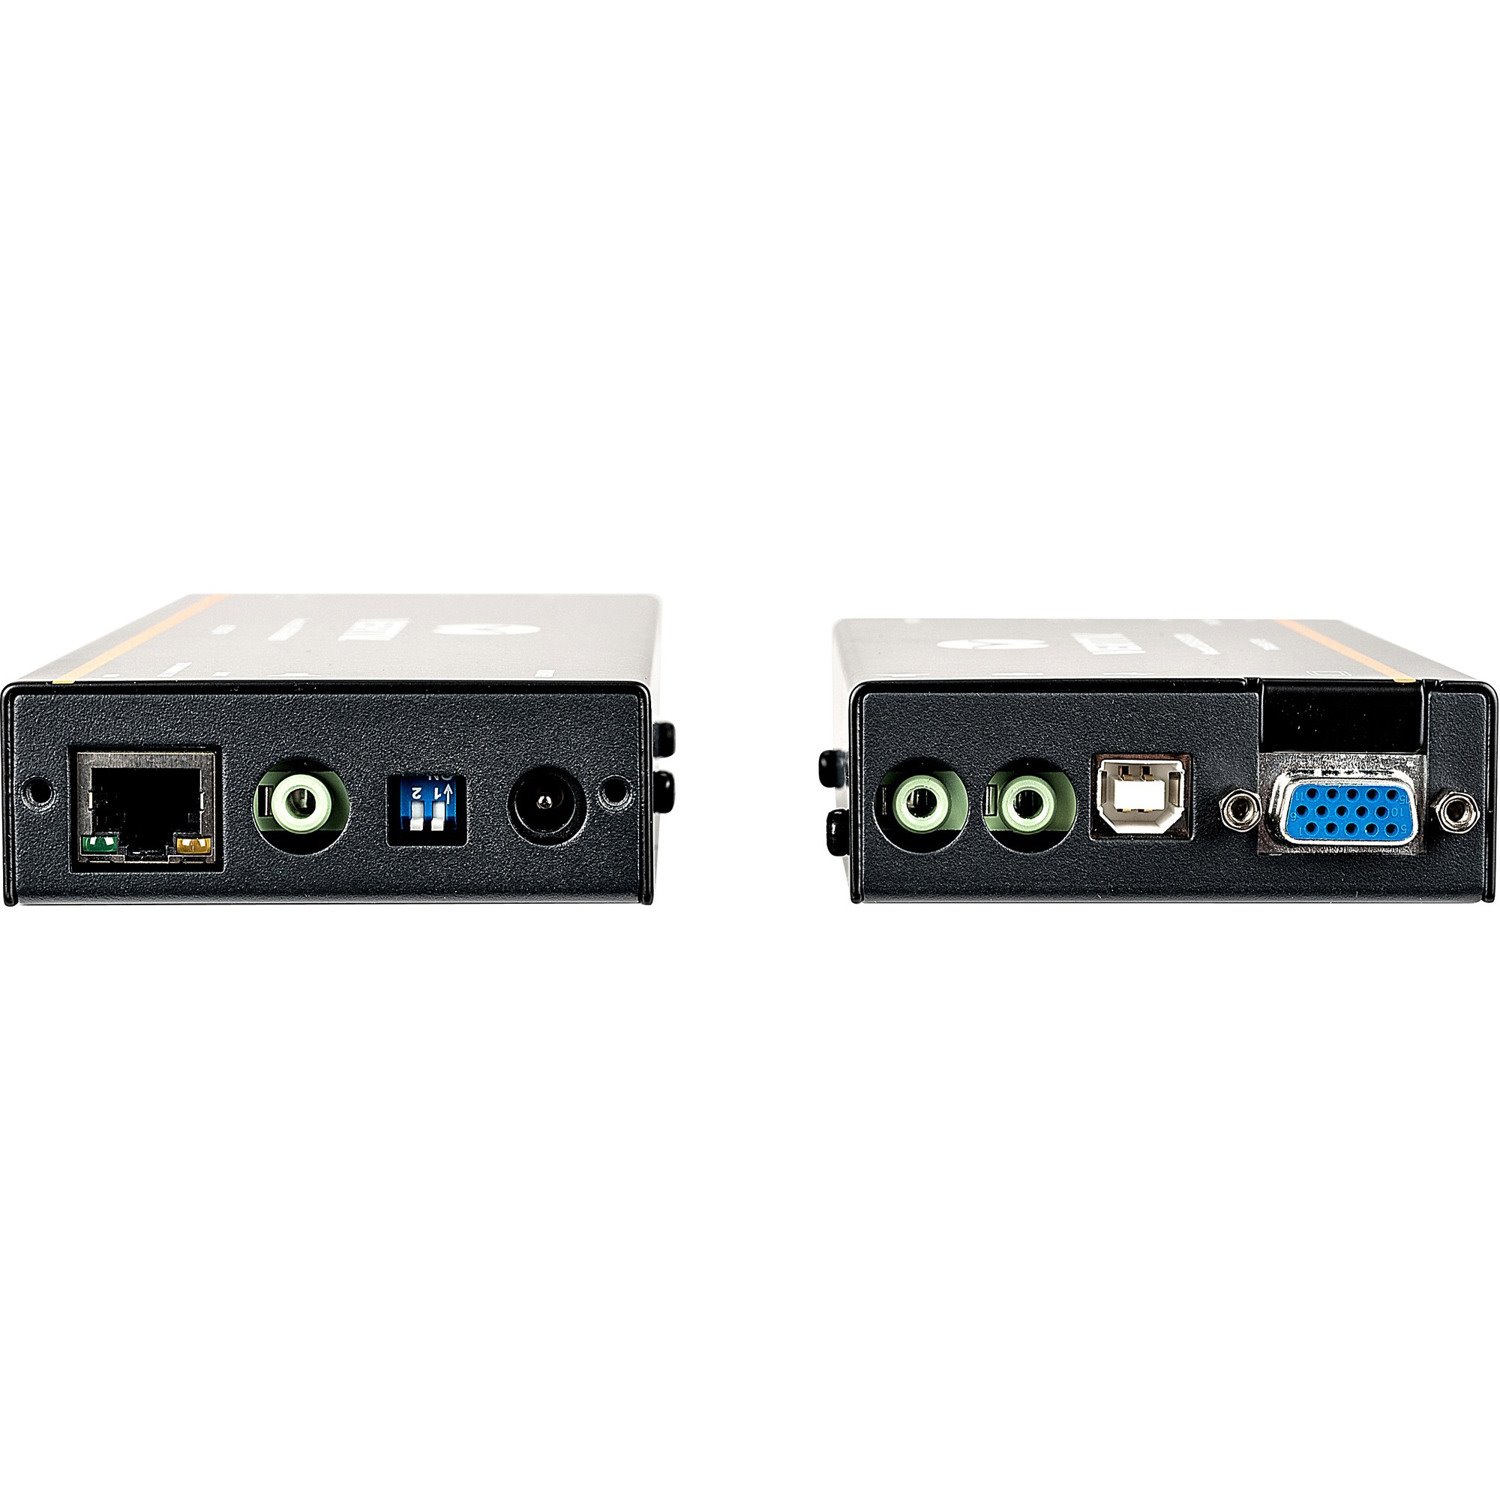 AVOCENT LV3010P KVM Console/Extender - Wired